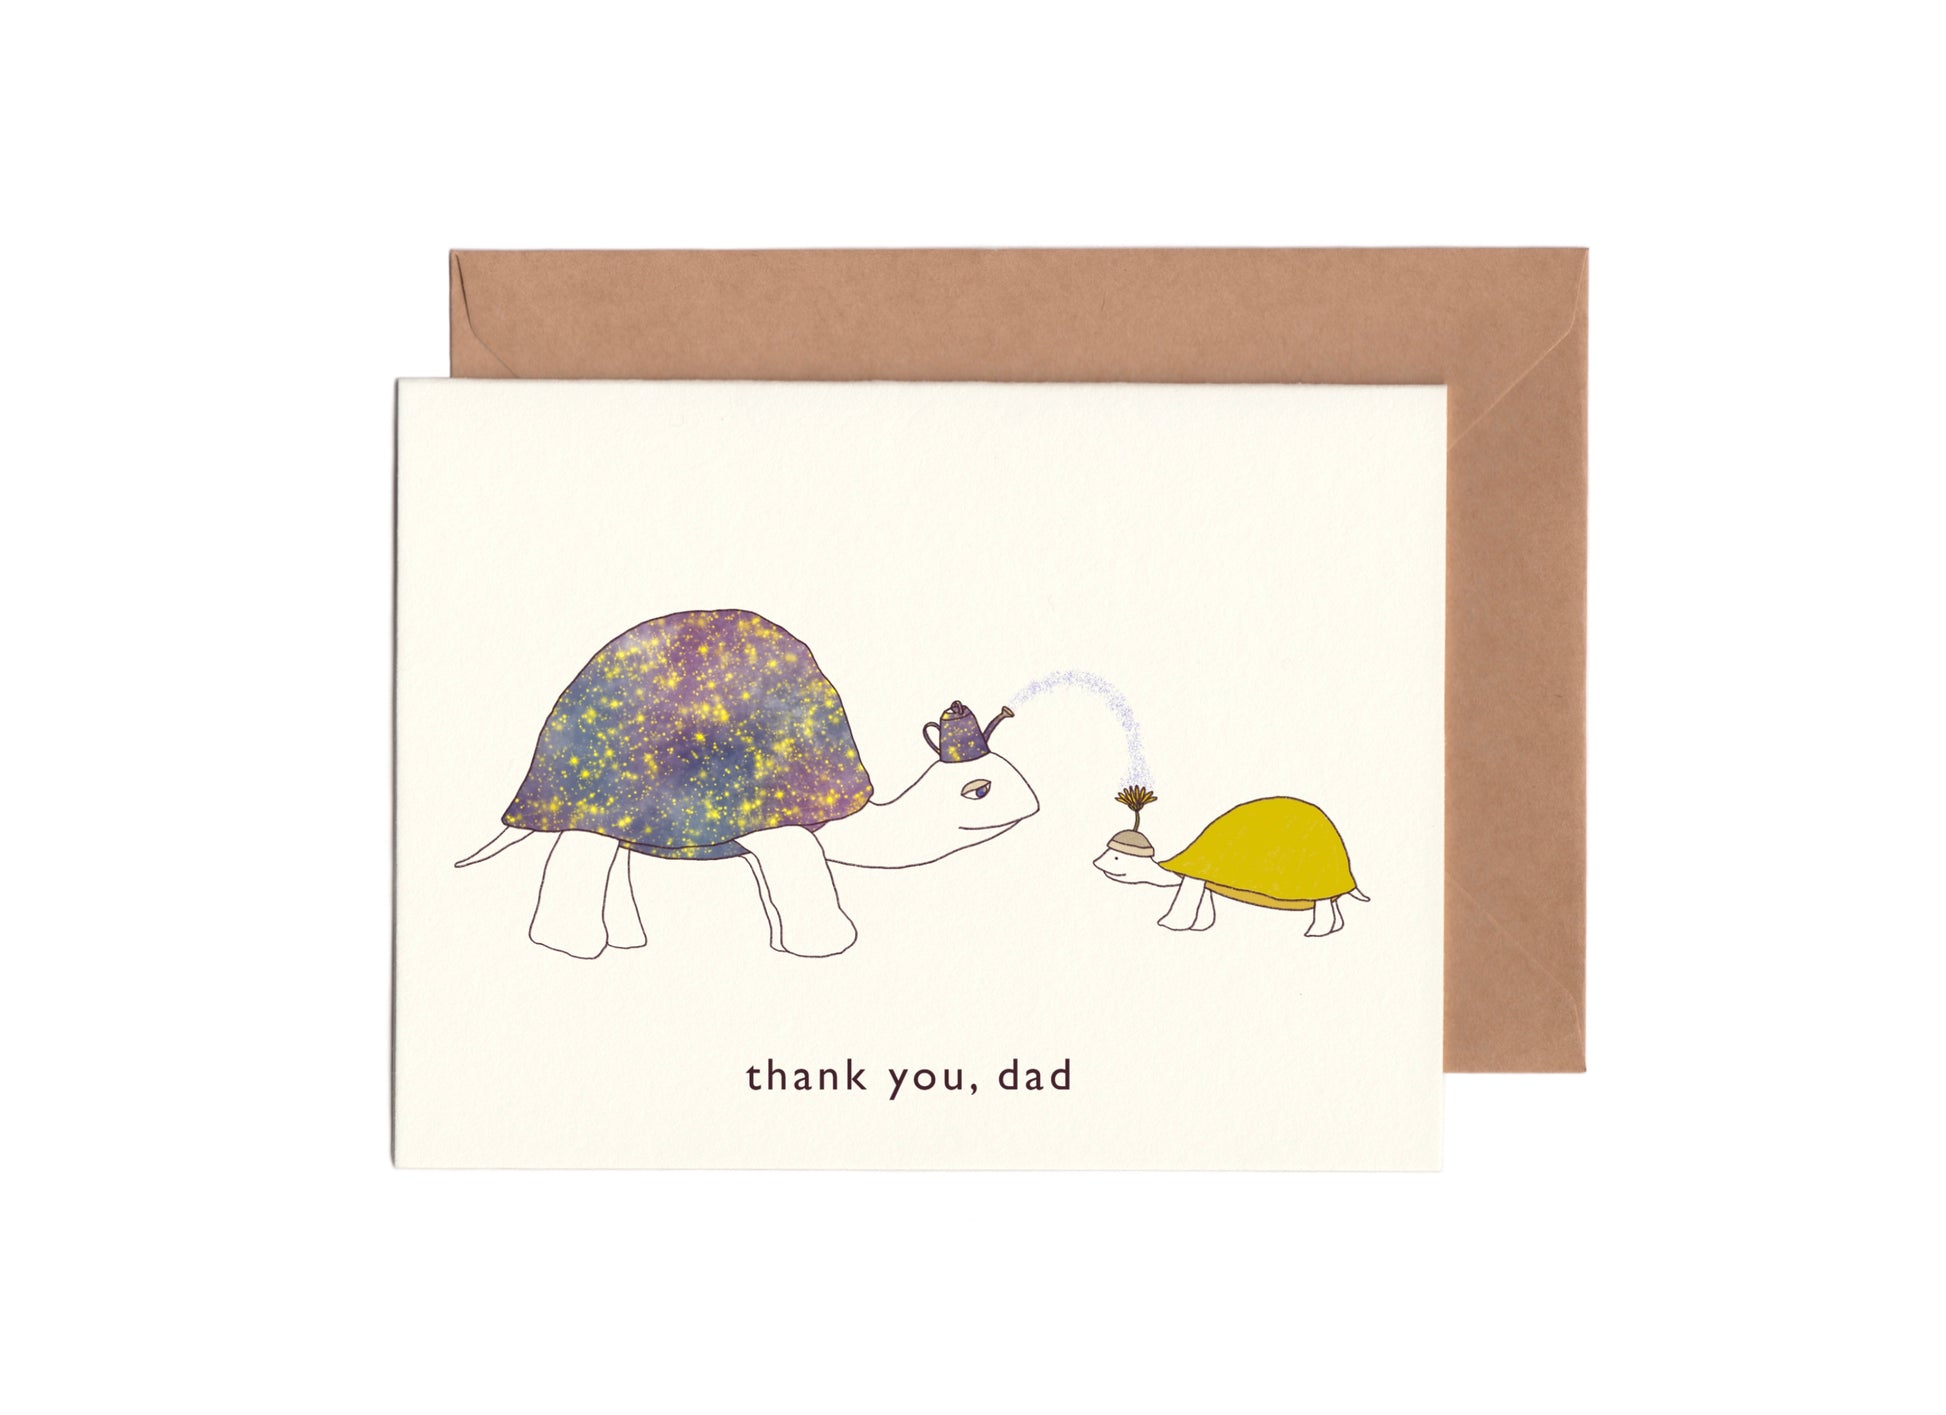 Cute card for fathers with an illustration of a father turtle with universe on the shell and a child turtle receiving love 